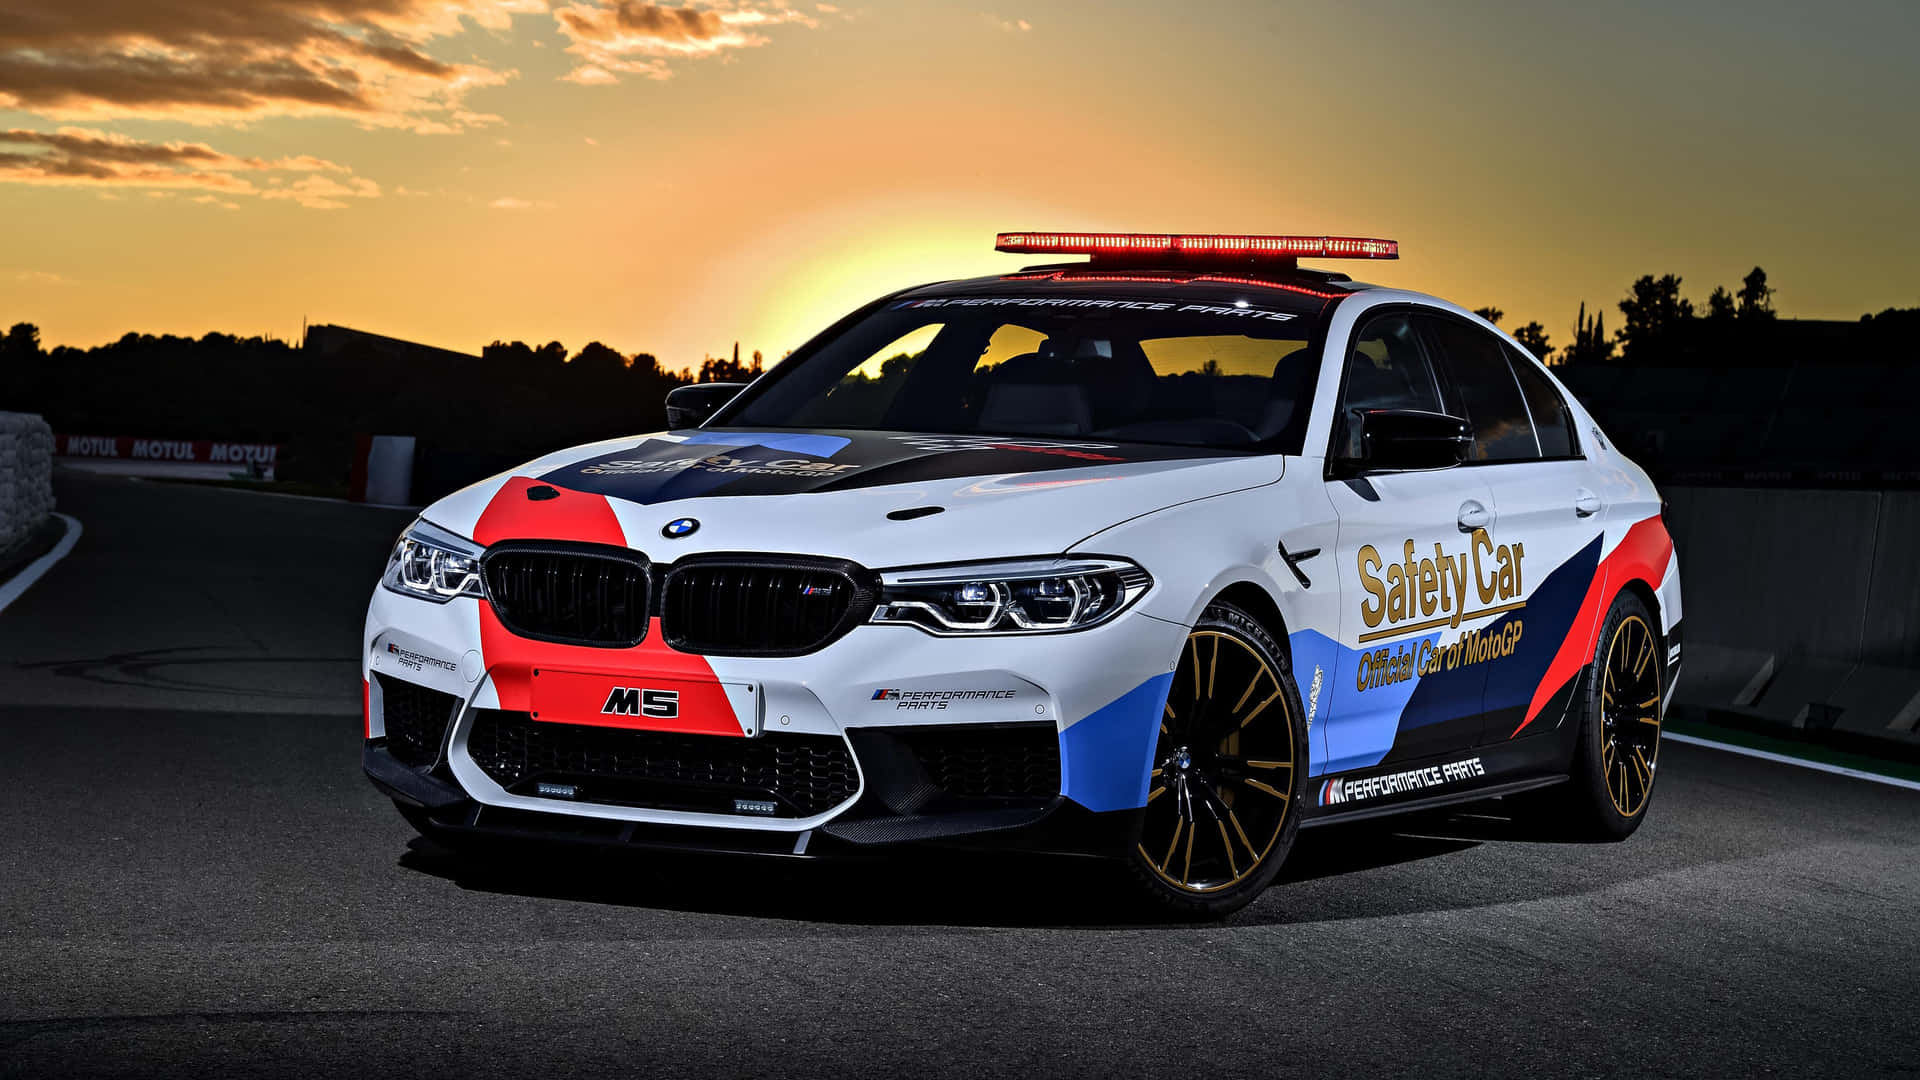 Safety Car on the racetrack Wallpaper